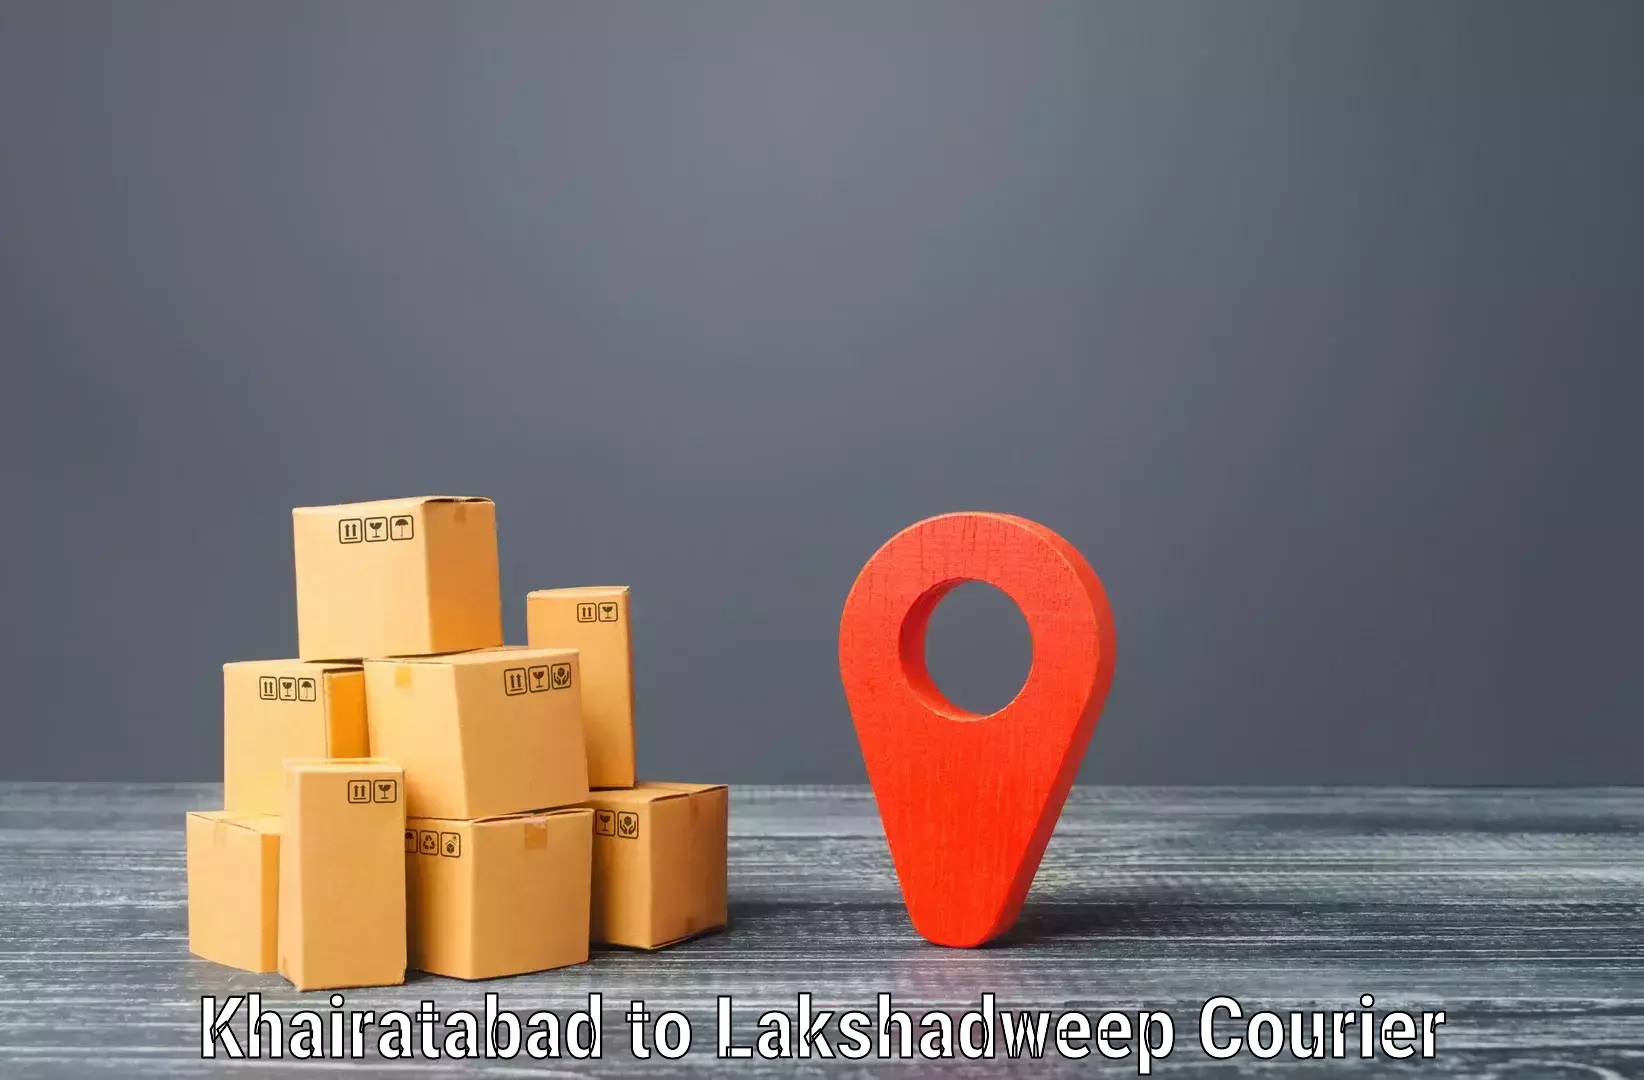 Supply chain delivery Khairatabad to Lakshadweep